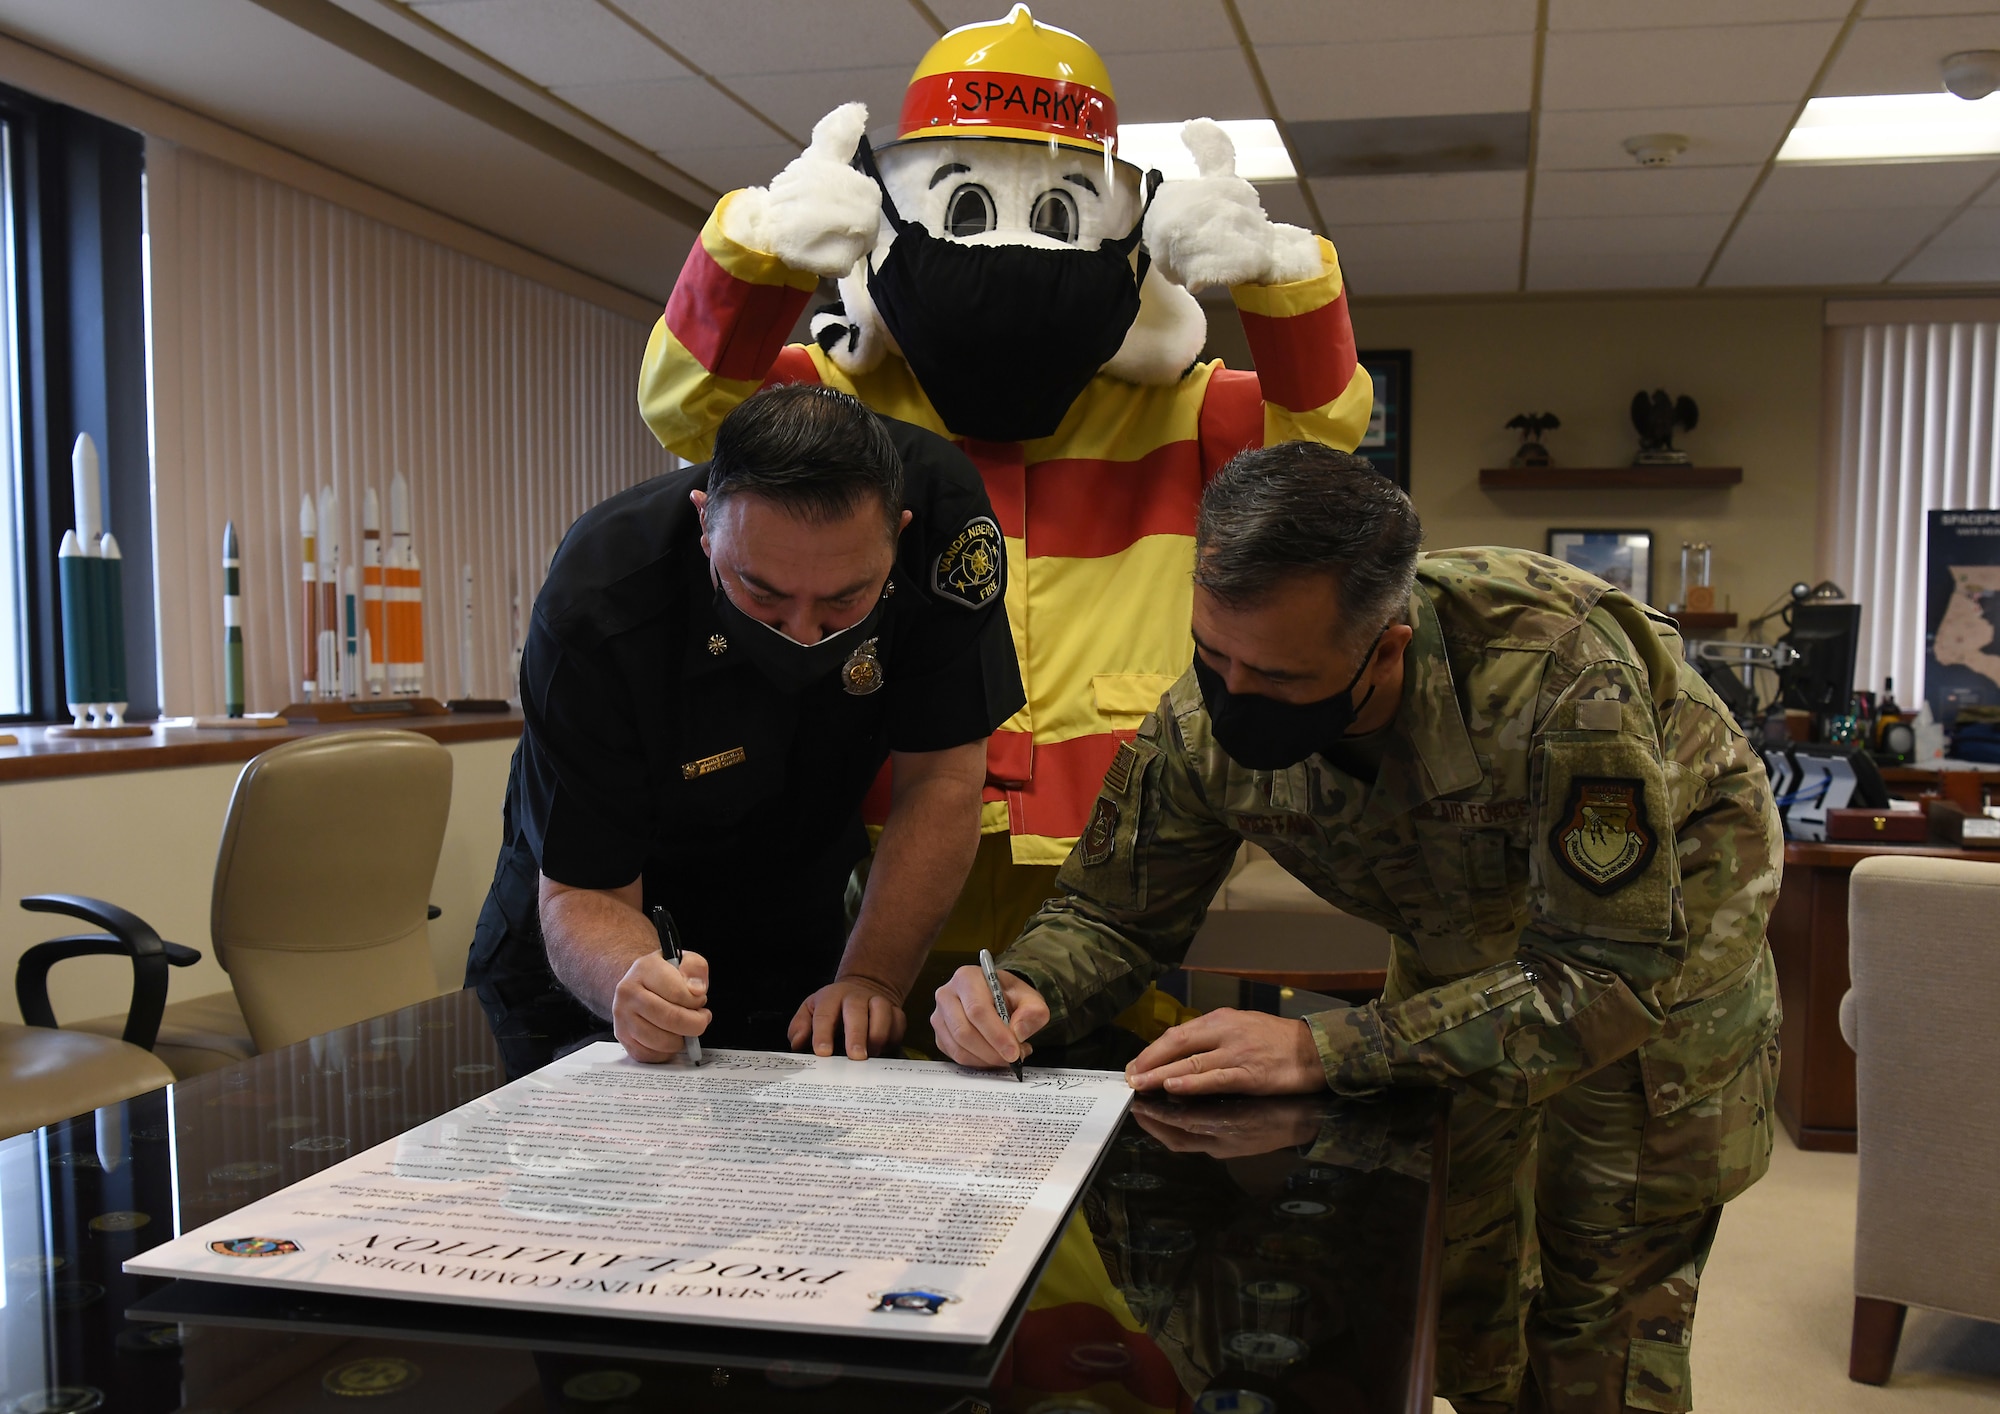 Col. Anthony Mastalir, 30th Space Wing commander, and Mark Farias, 30th Civil Engineer Squadron fire chief, sign the 2020 Fire Proclamation with Sparky the Fire Dog Oct. 5, 2020, at Vandenberg Air Force Base, Calif.